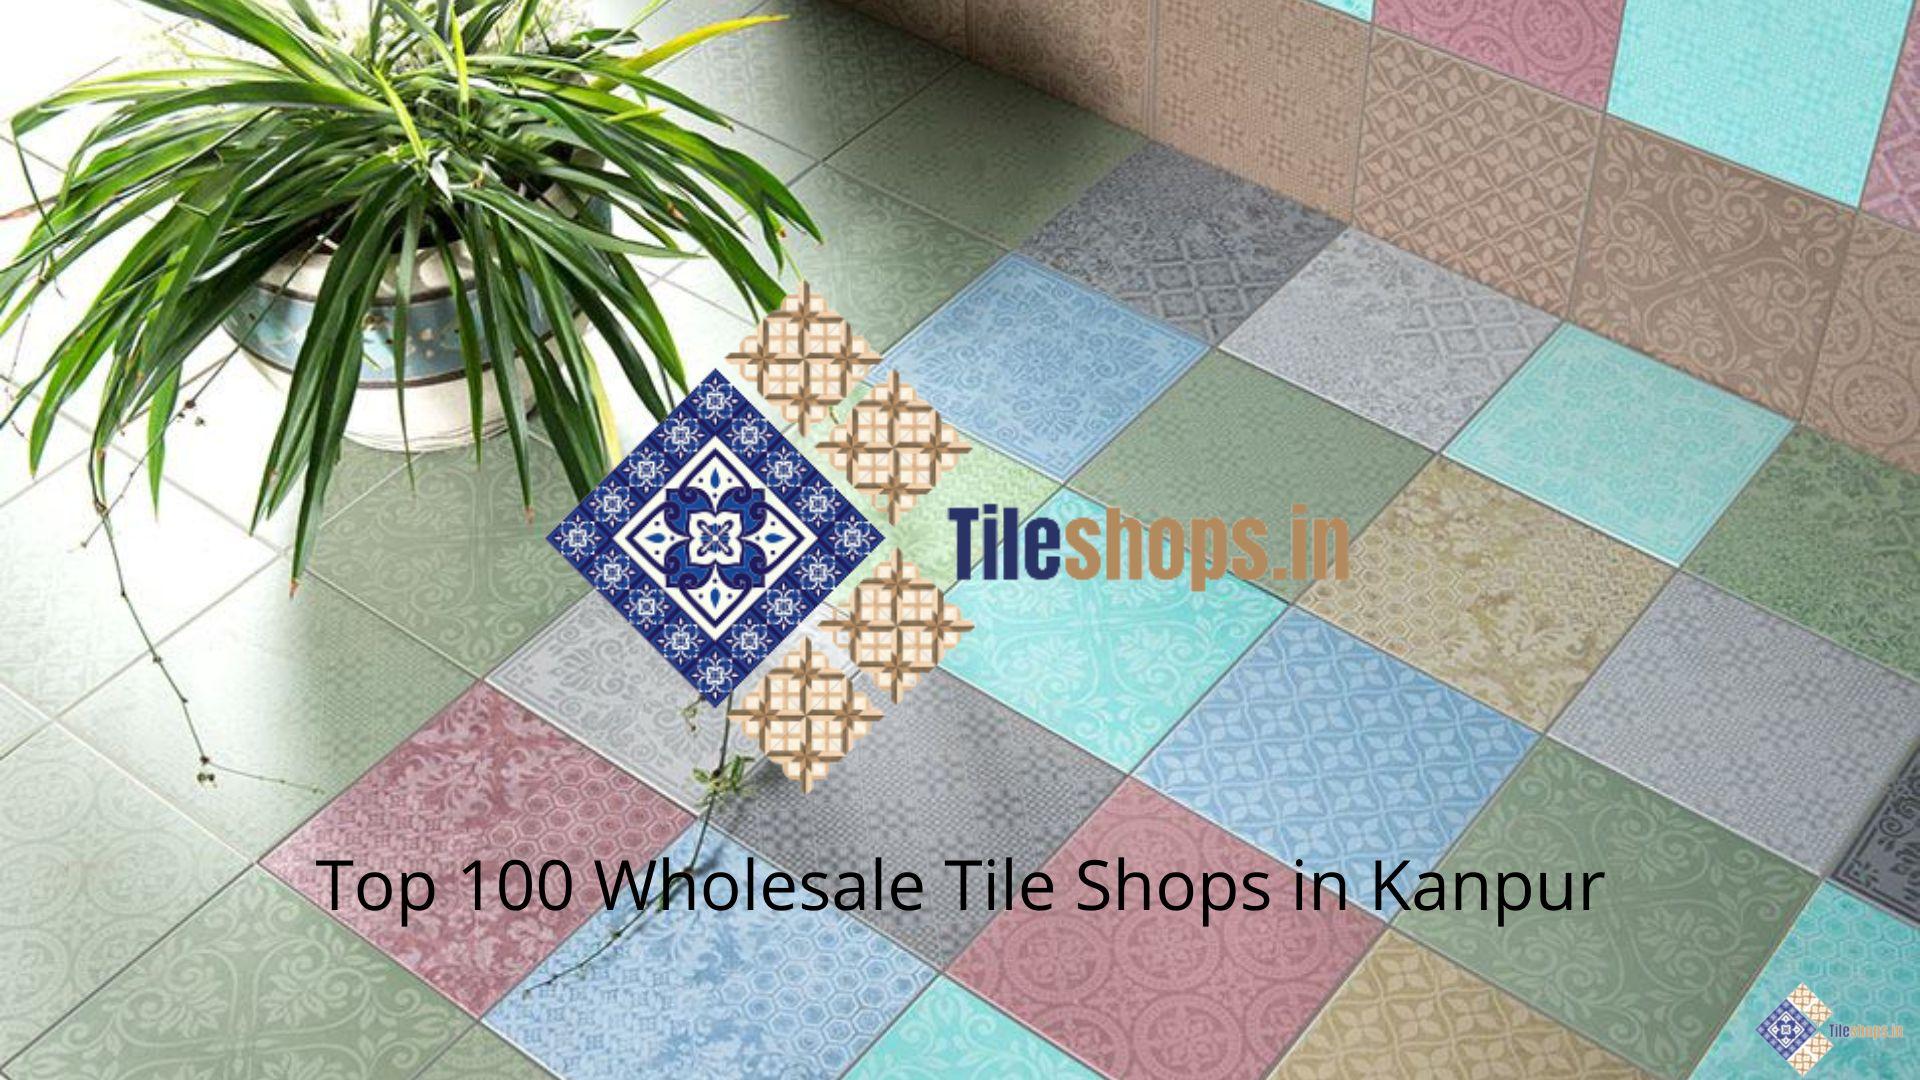 Top 100 Wholesale Tile Shops in Kanpur